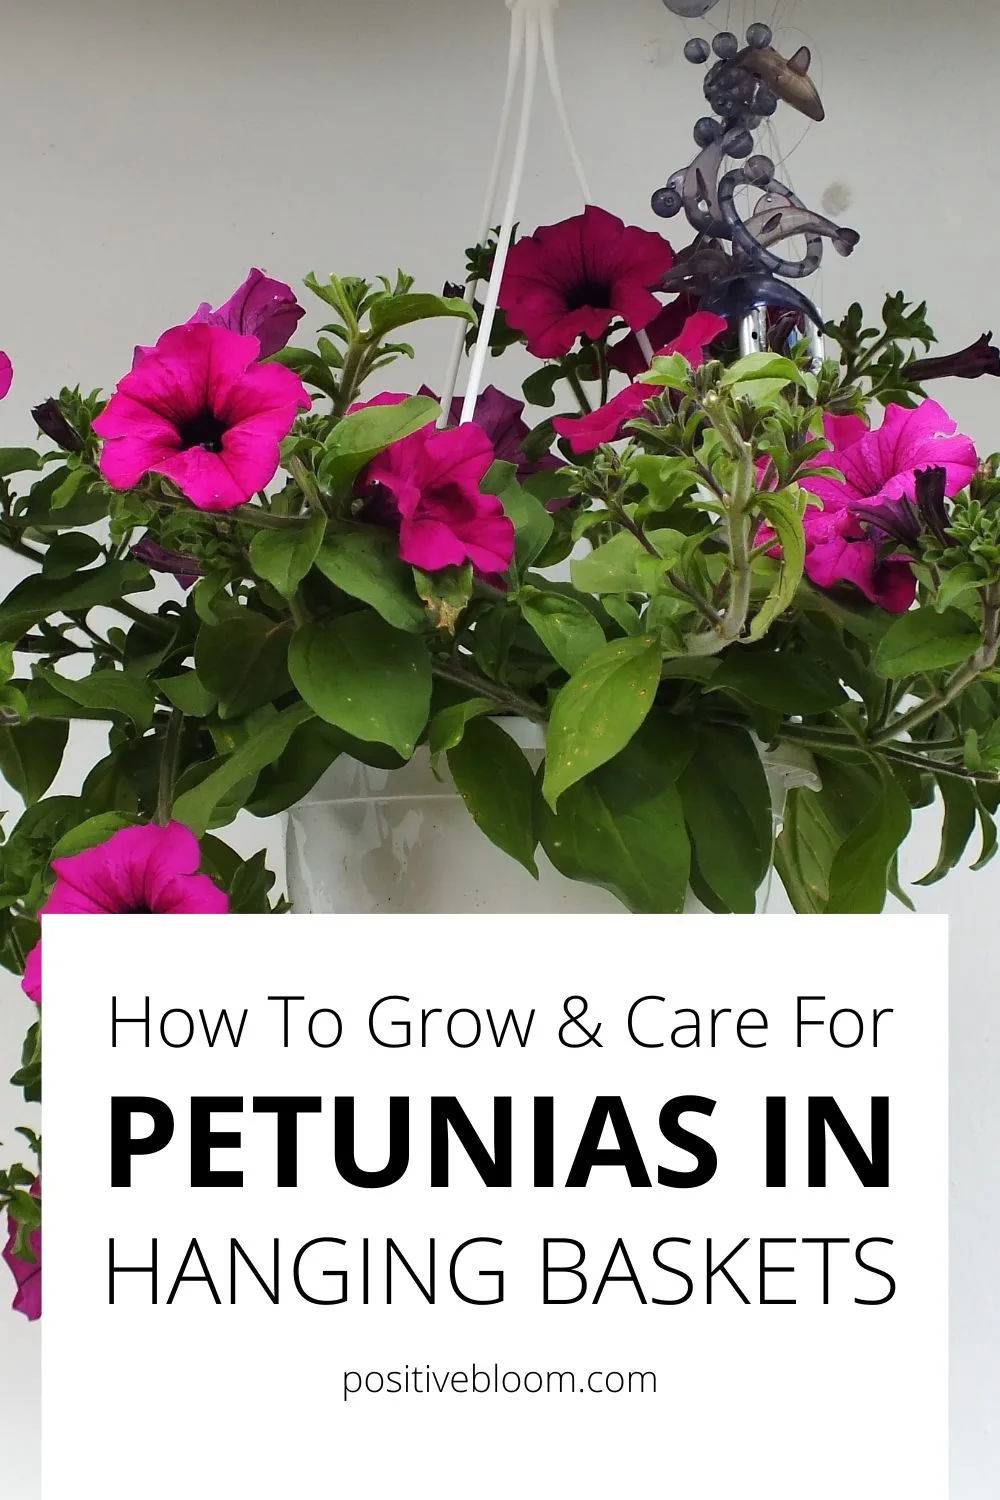 How To Grow & Care For Petunias In Hanging Baskets Pinterest